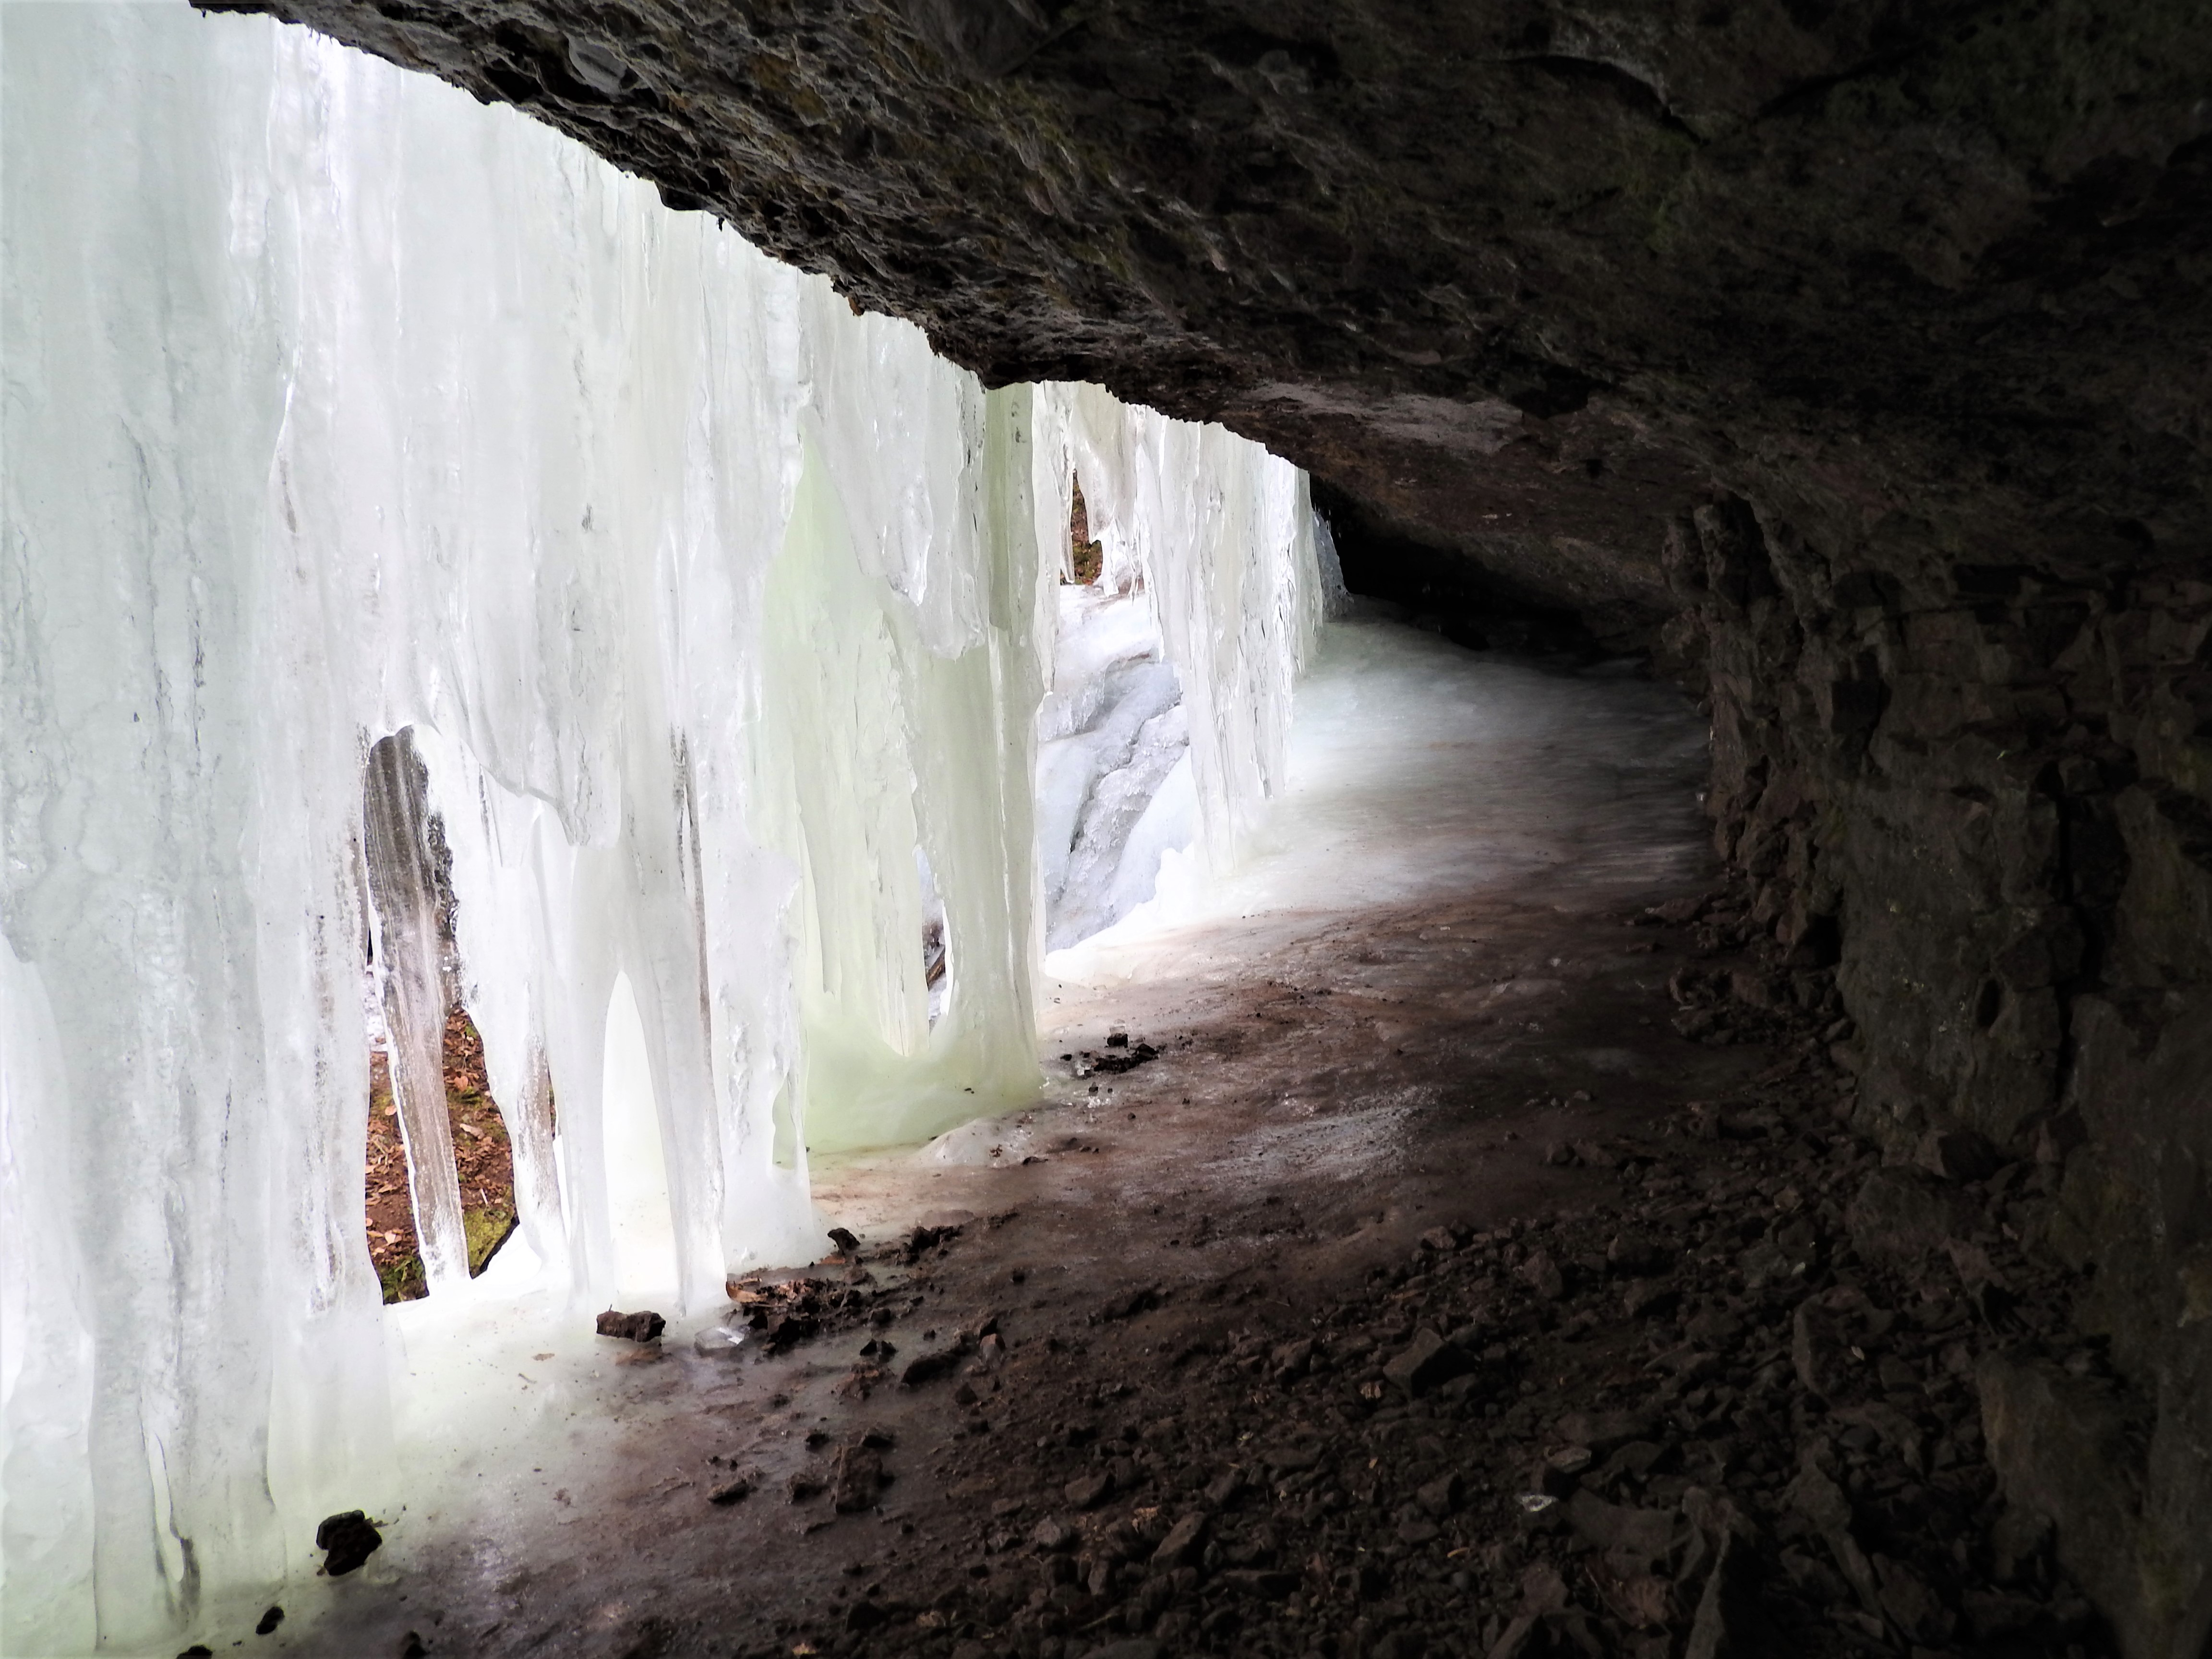 The Cave behind the ice sheet